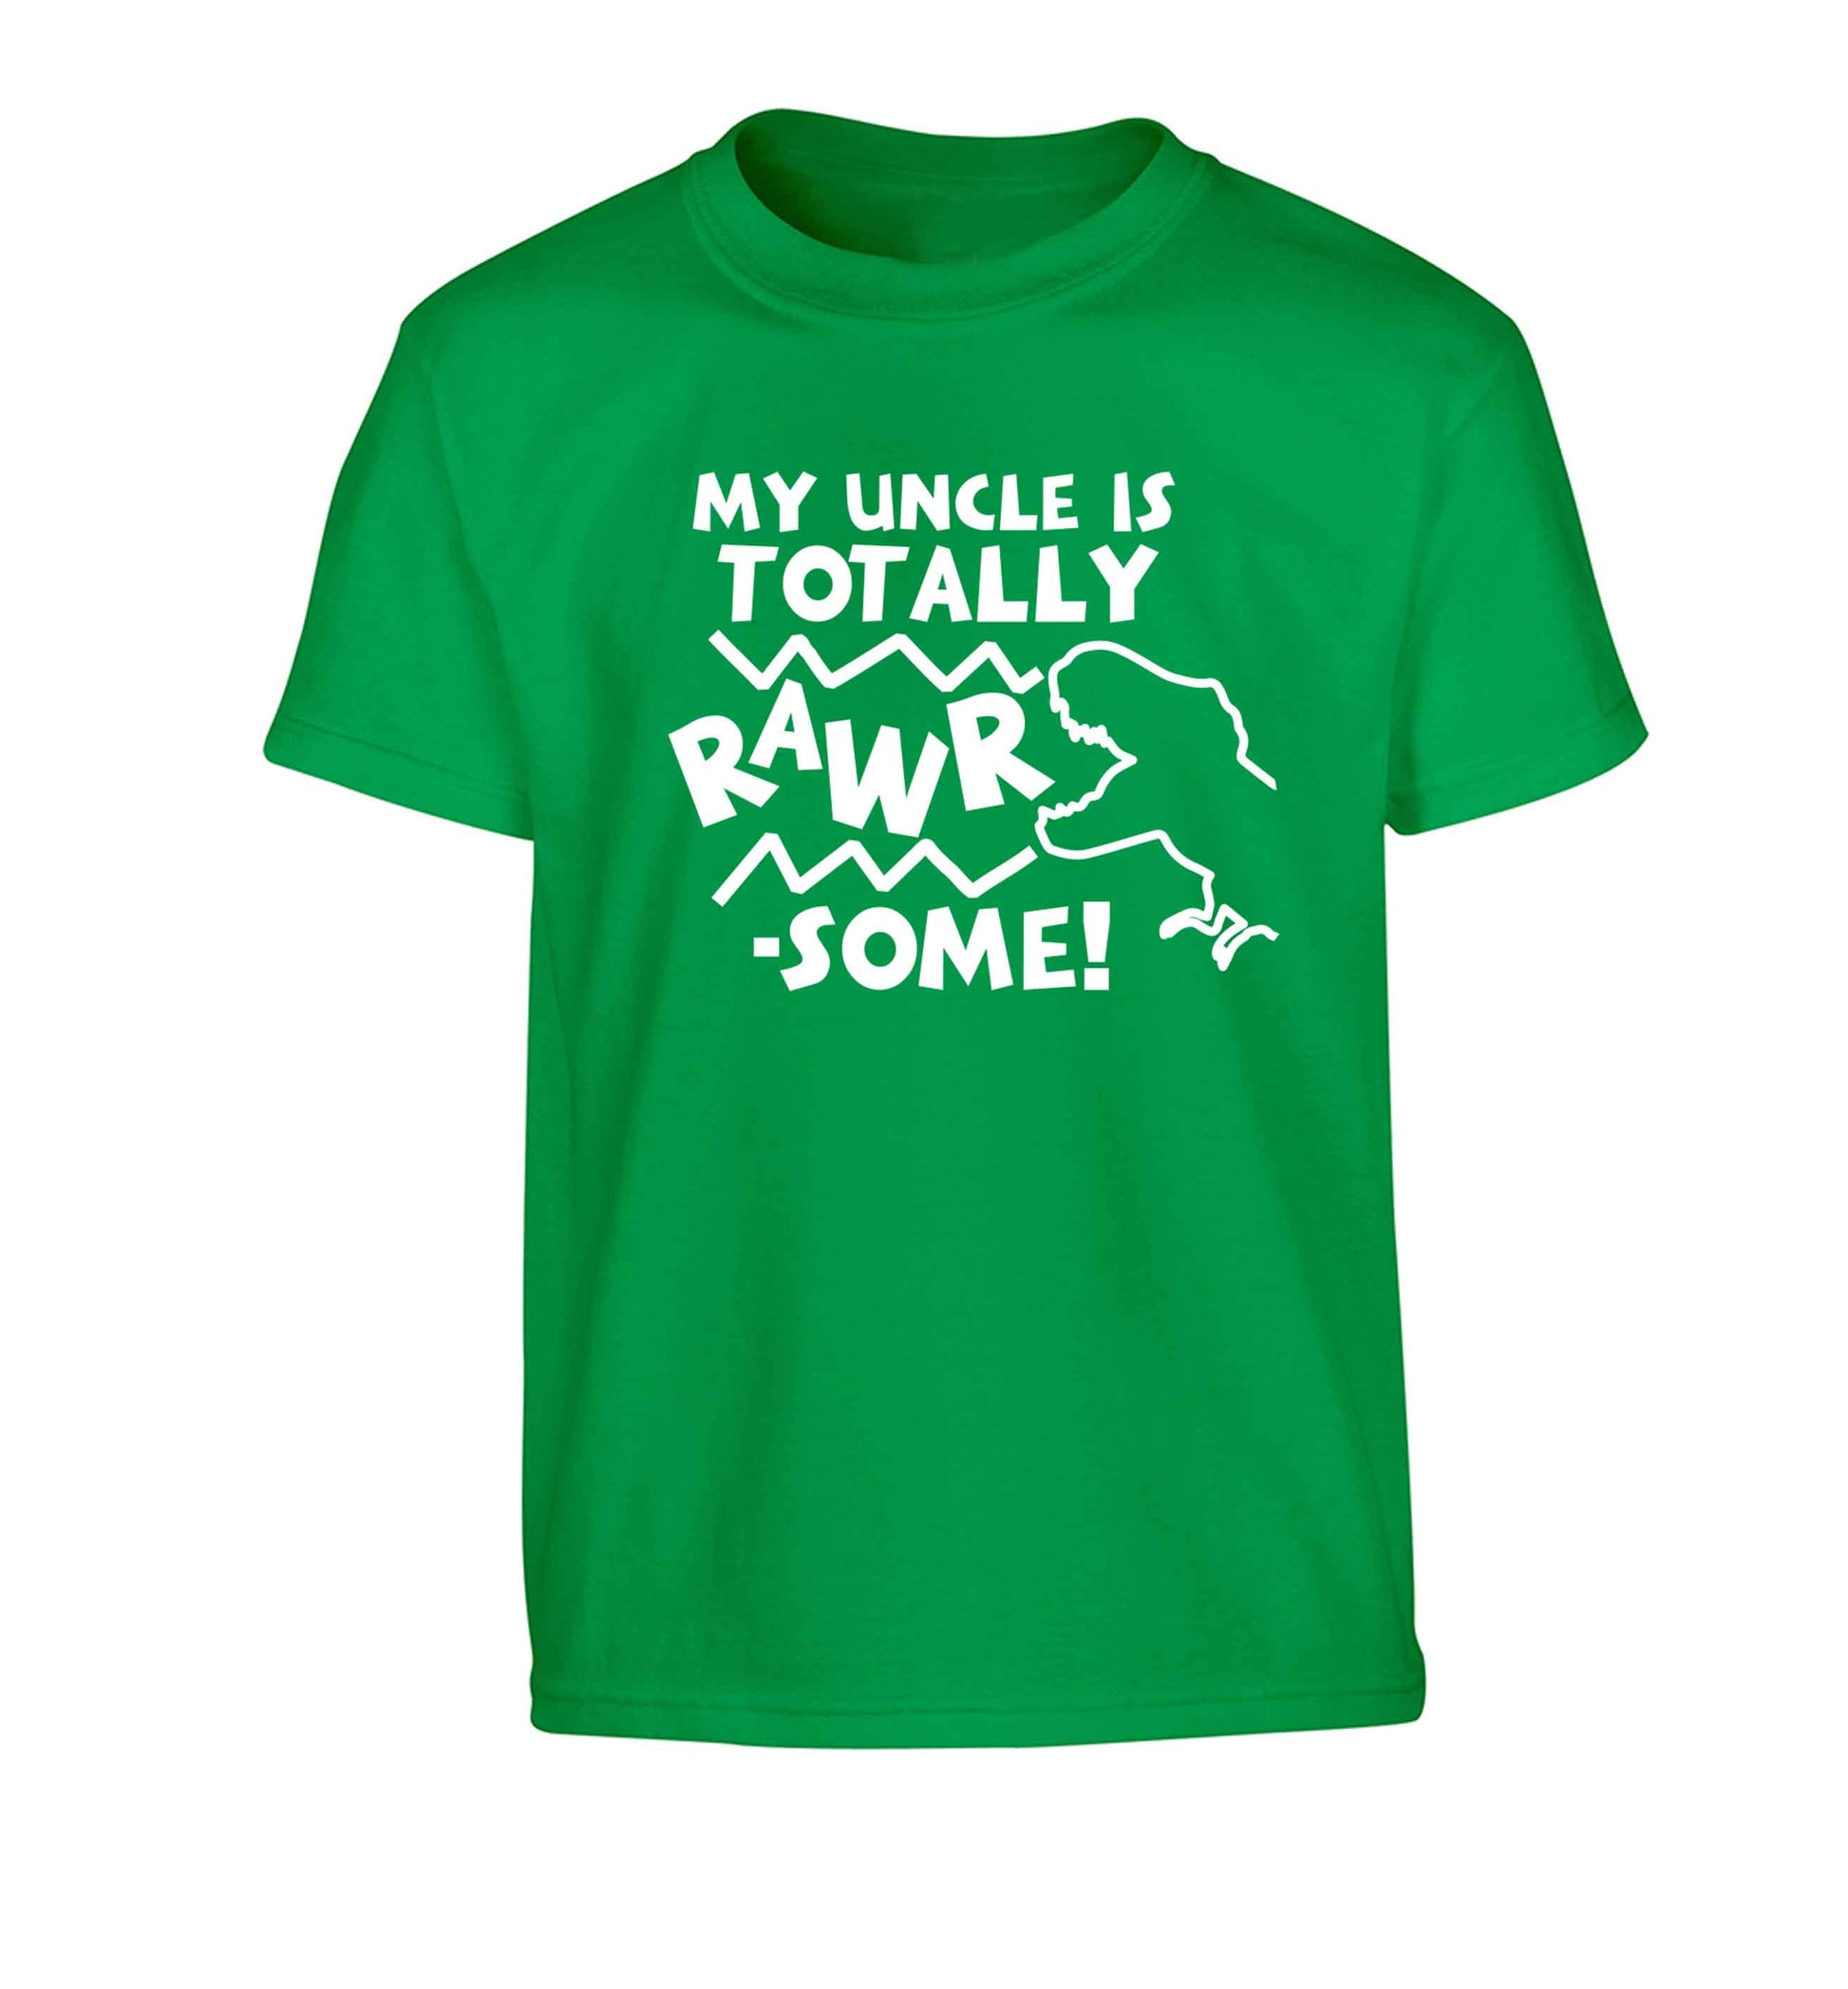 My uncle is totally rawrsome Children's green Tshirt 12-13 Years